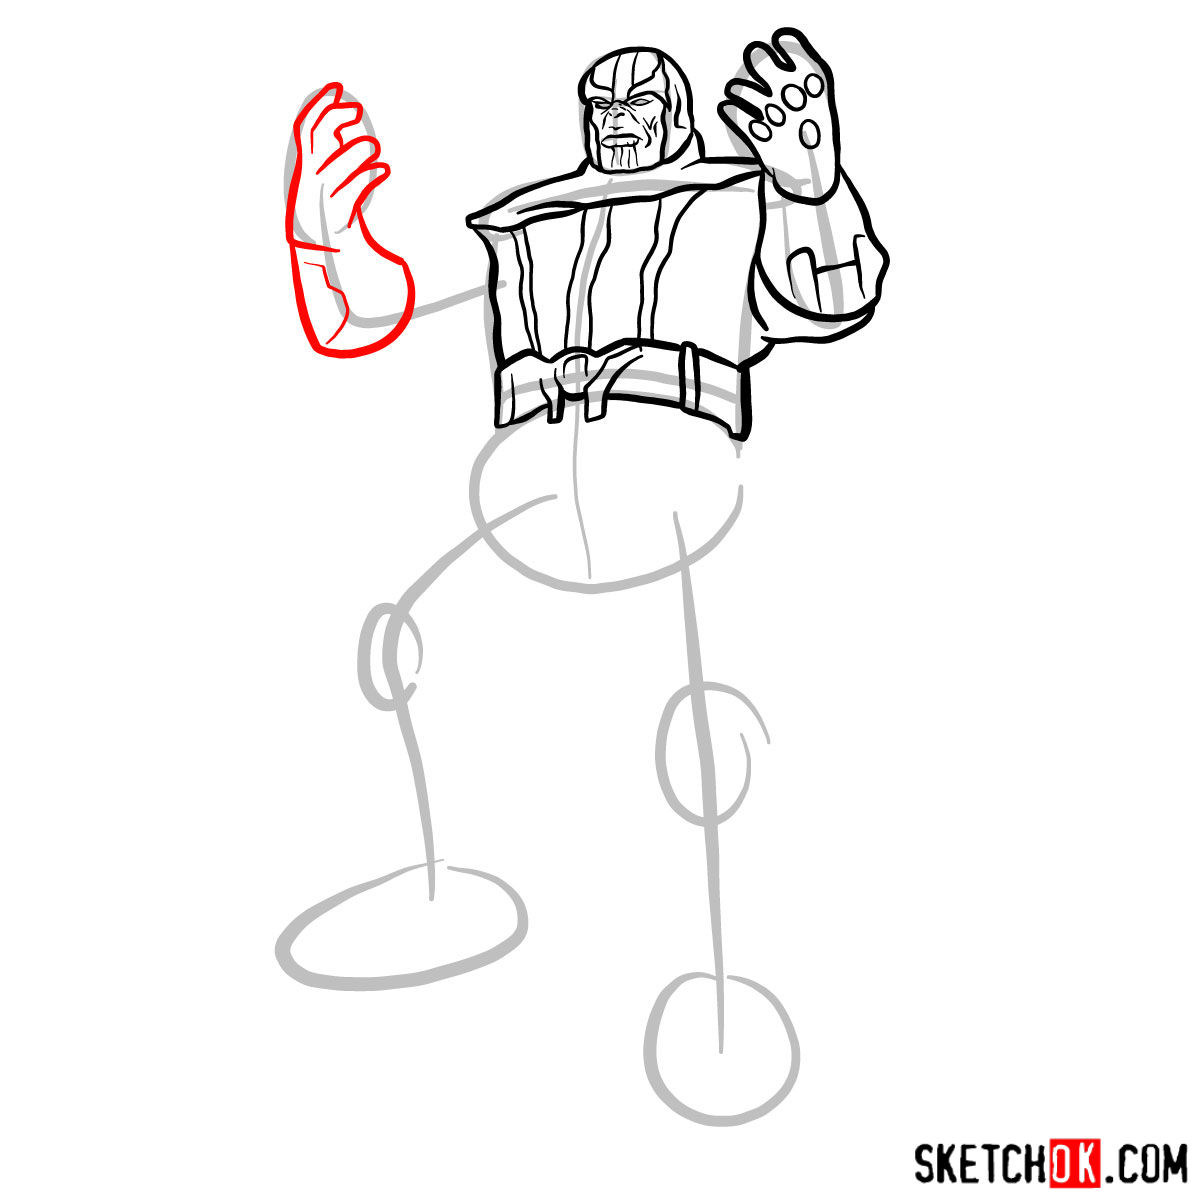 How to draw Thanos with 5 Infinity Stones - step 10